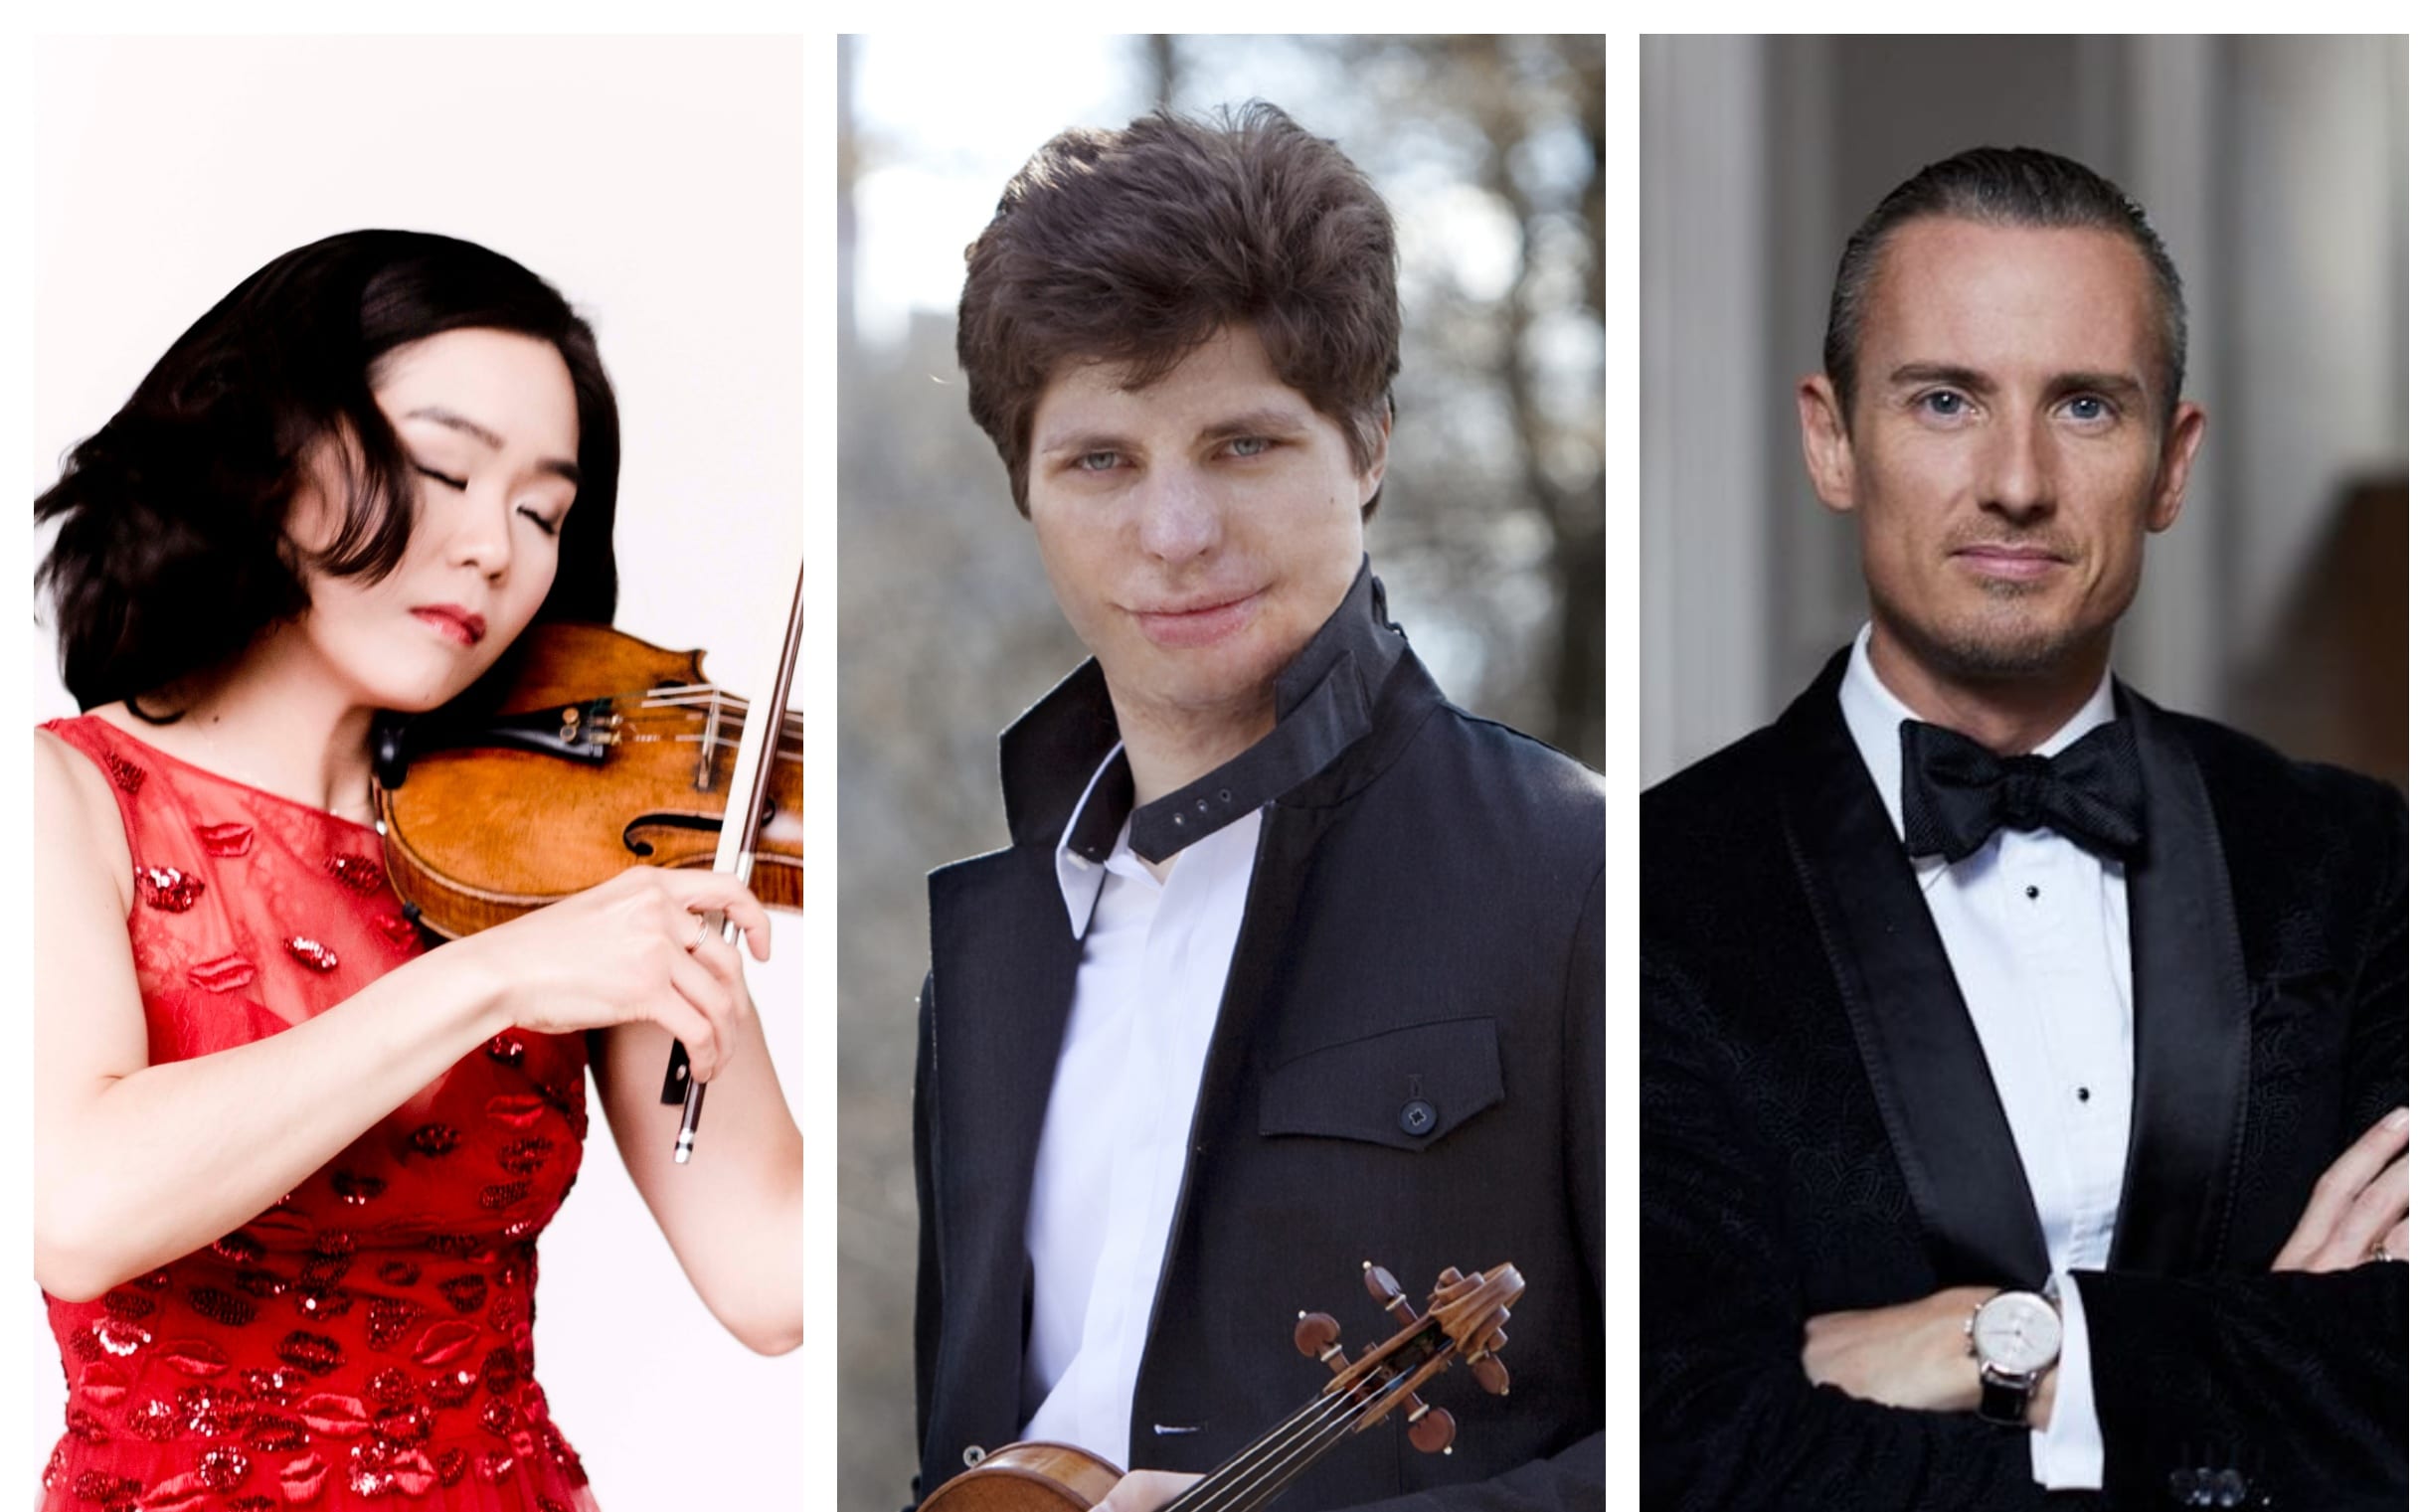 From left, Violinist Esther Yoo, Violinist Augustin Hadelich, Conductor Alexander Shelley